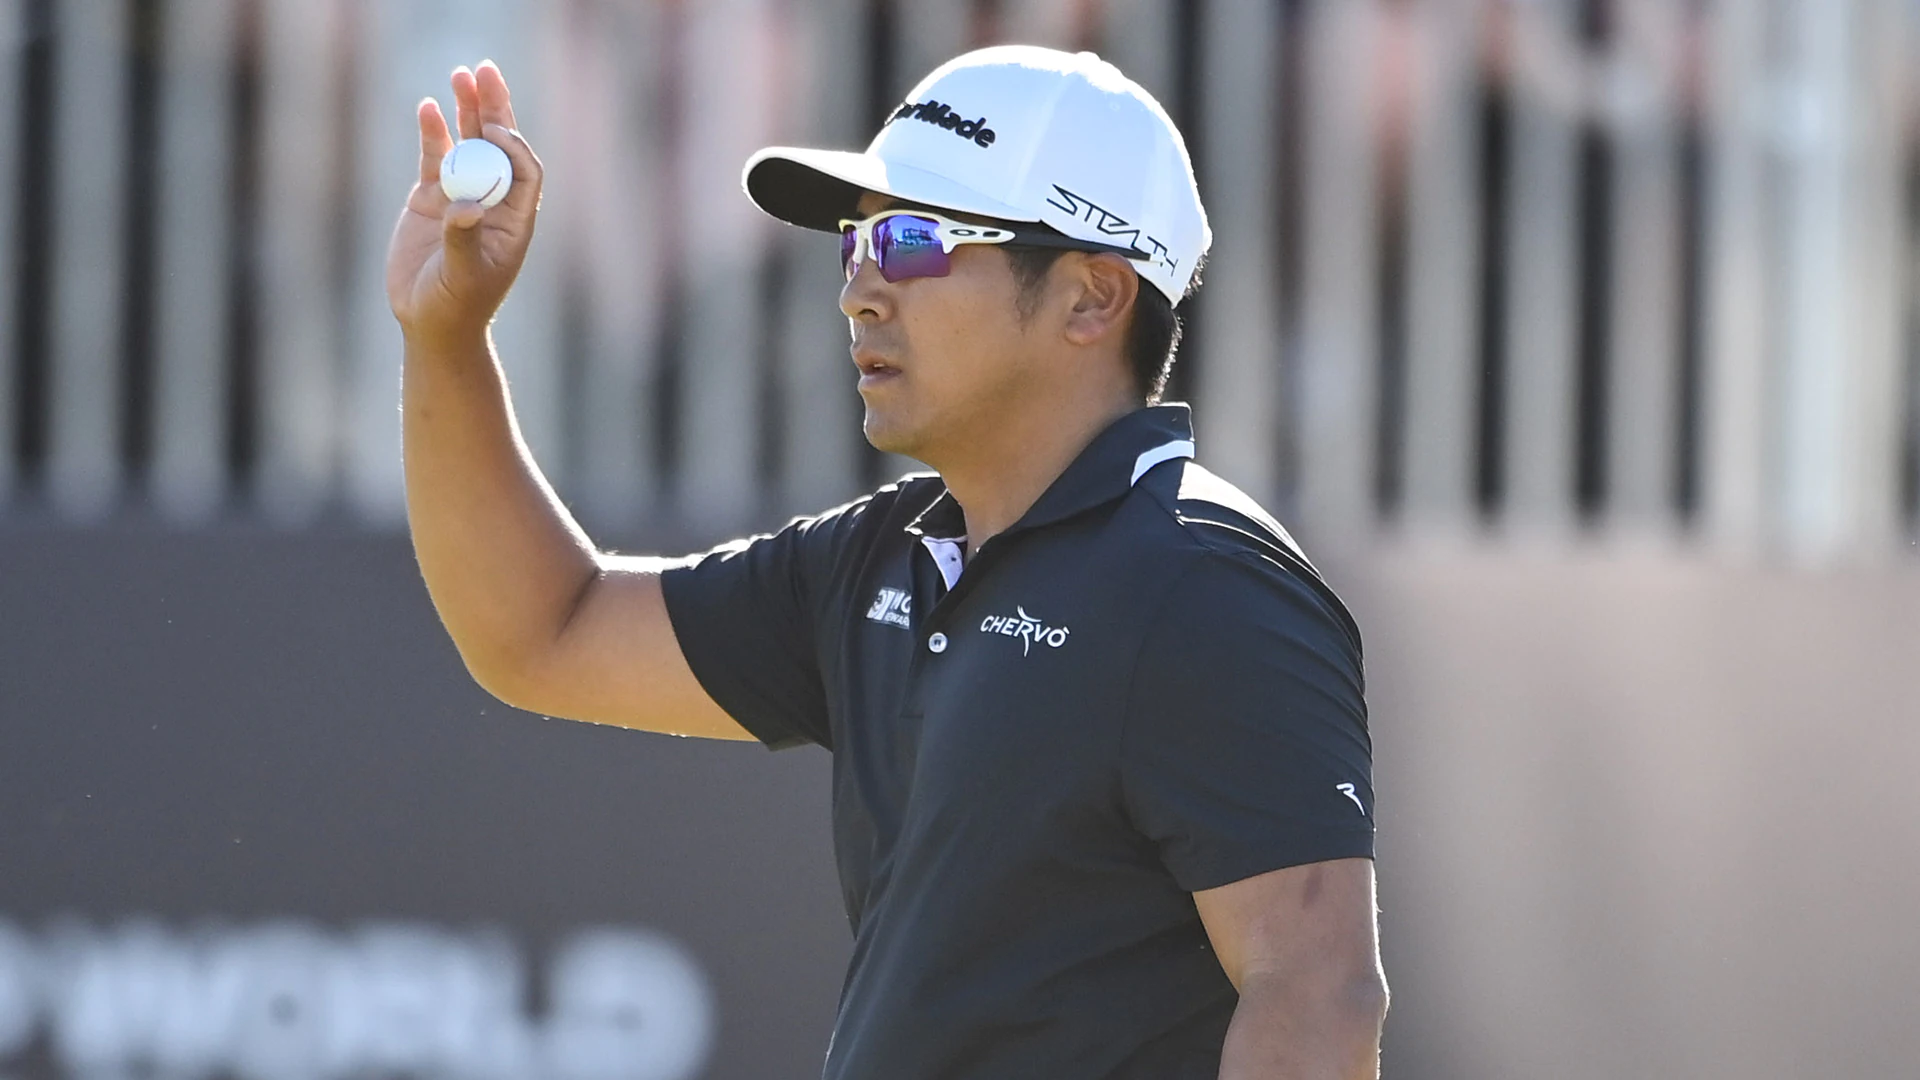 Kurt Kitayama doesn’t win Scottish, but he joins 2 others in qualifying for Open